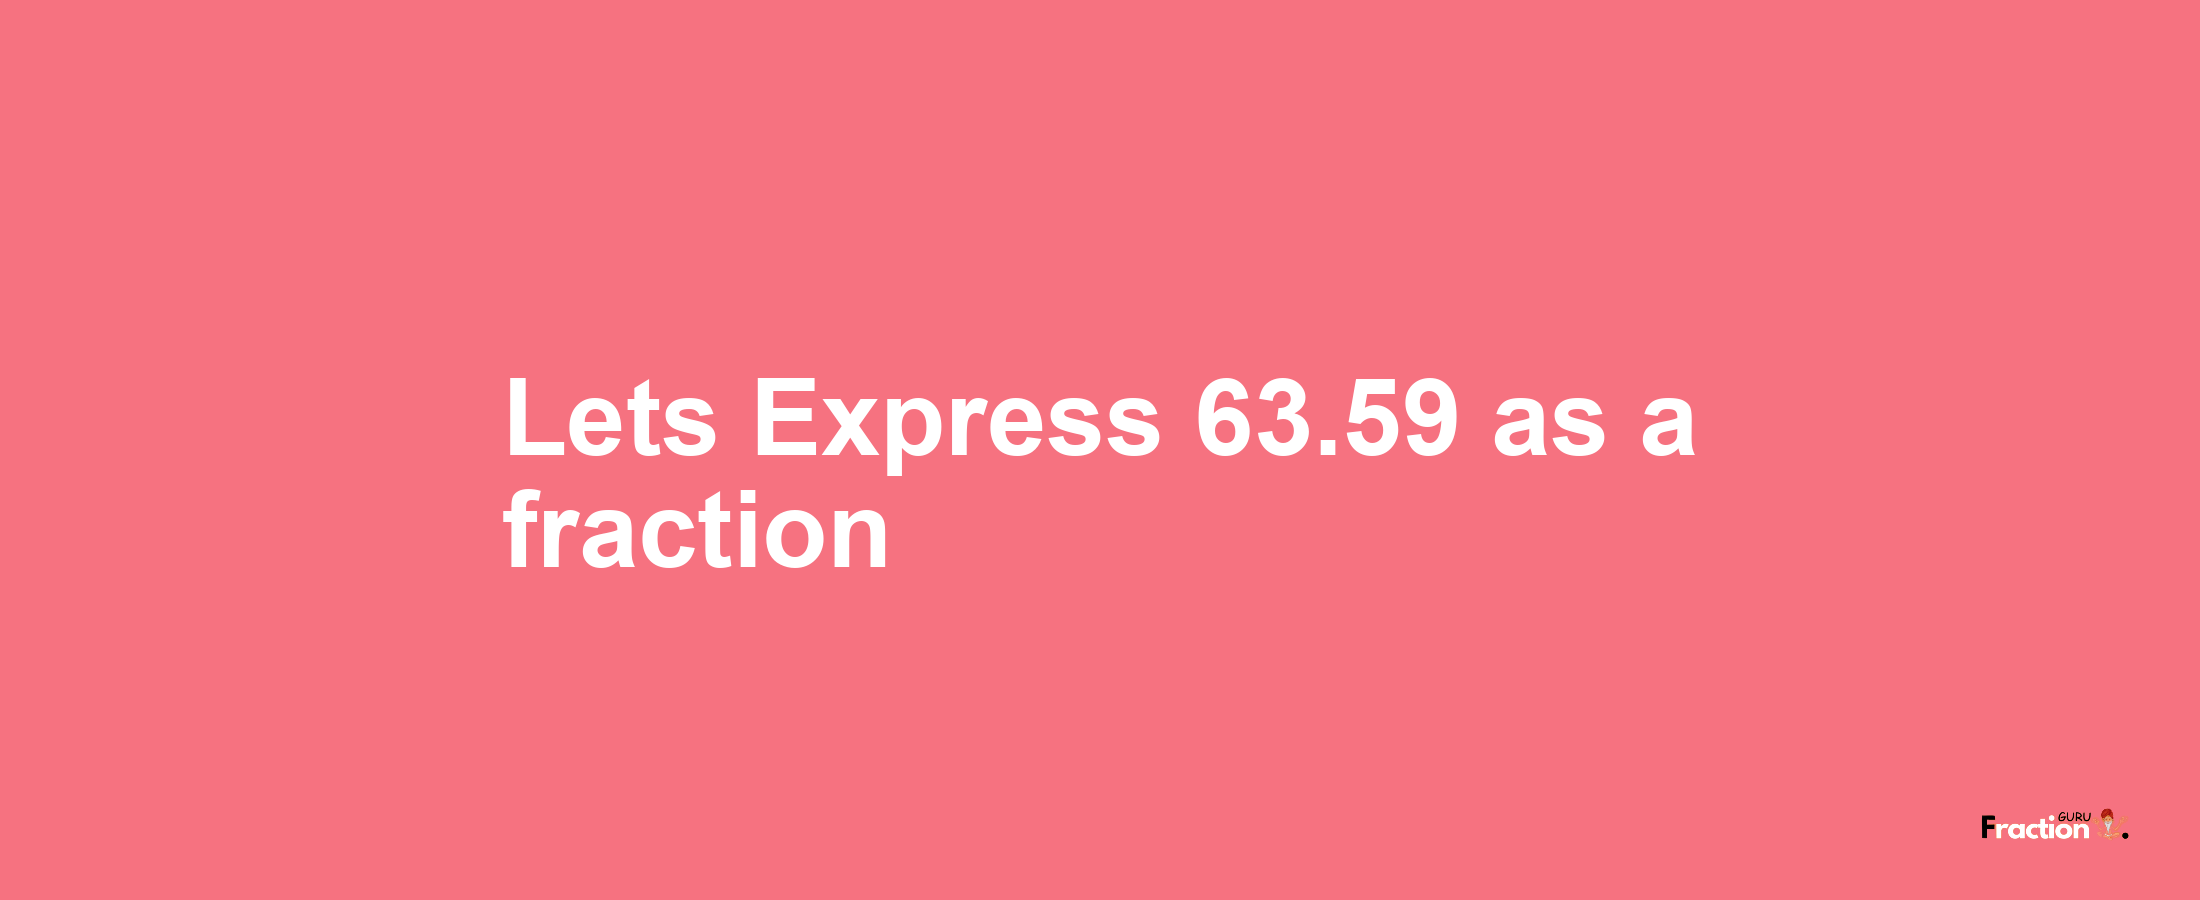 Lets Express 63.59 as afraction